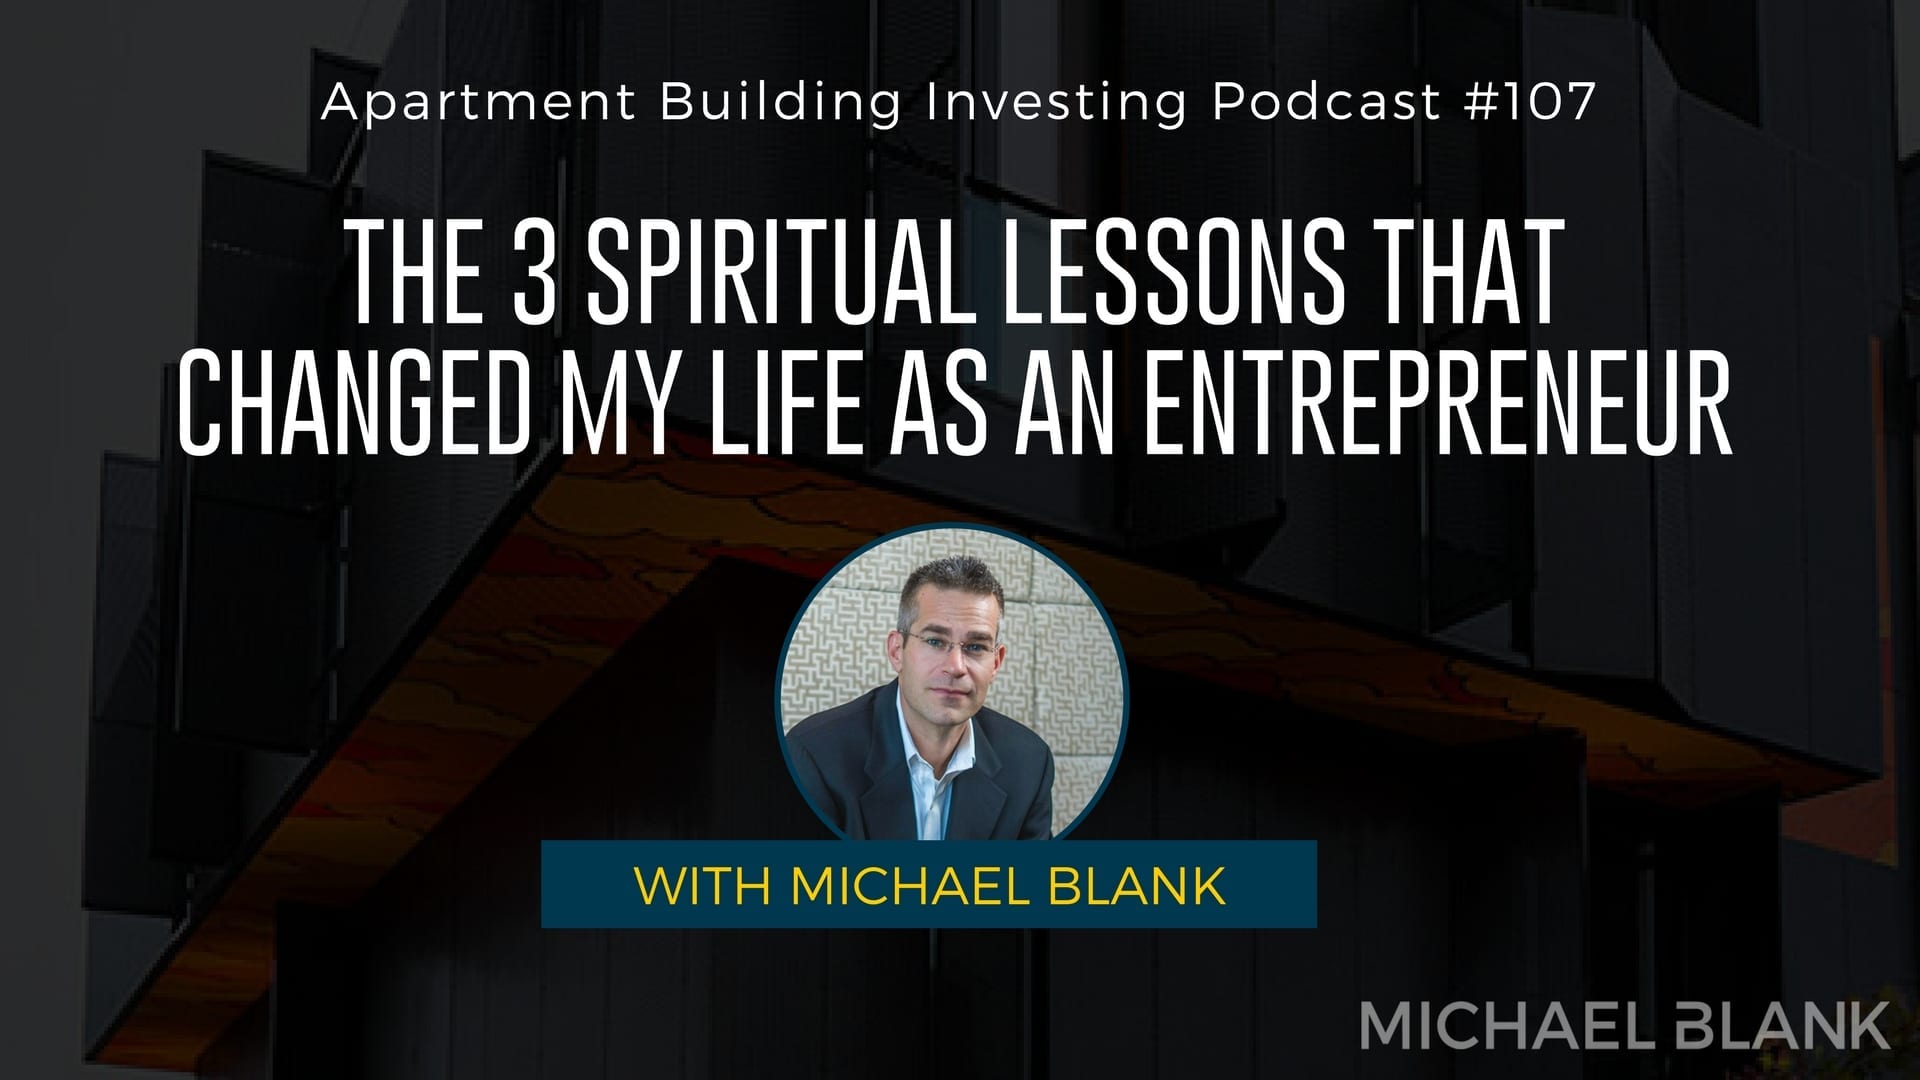 MB 107: The 3 Spiritual Lessons That Changed My Life as an Entrepreneur – With Michael Blank